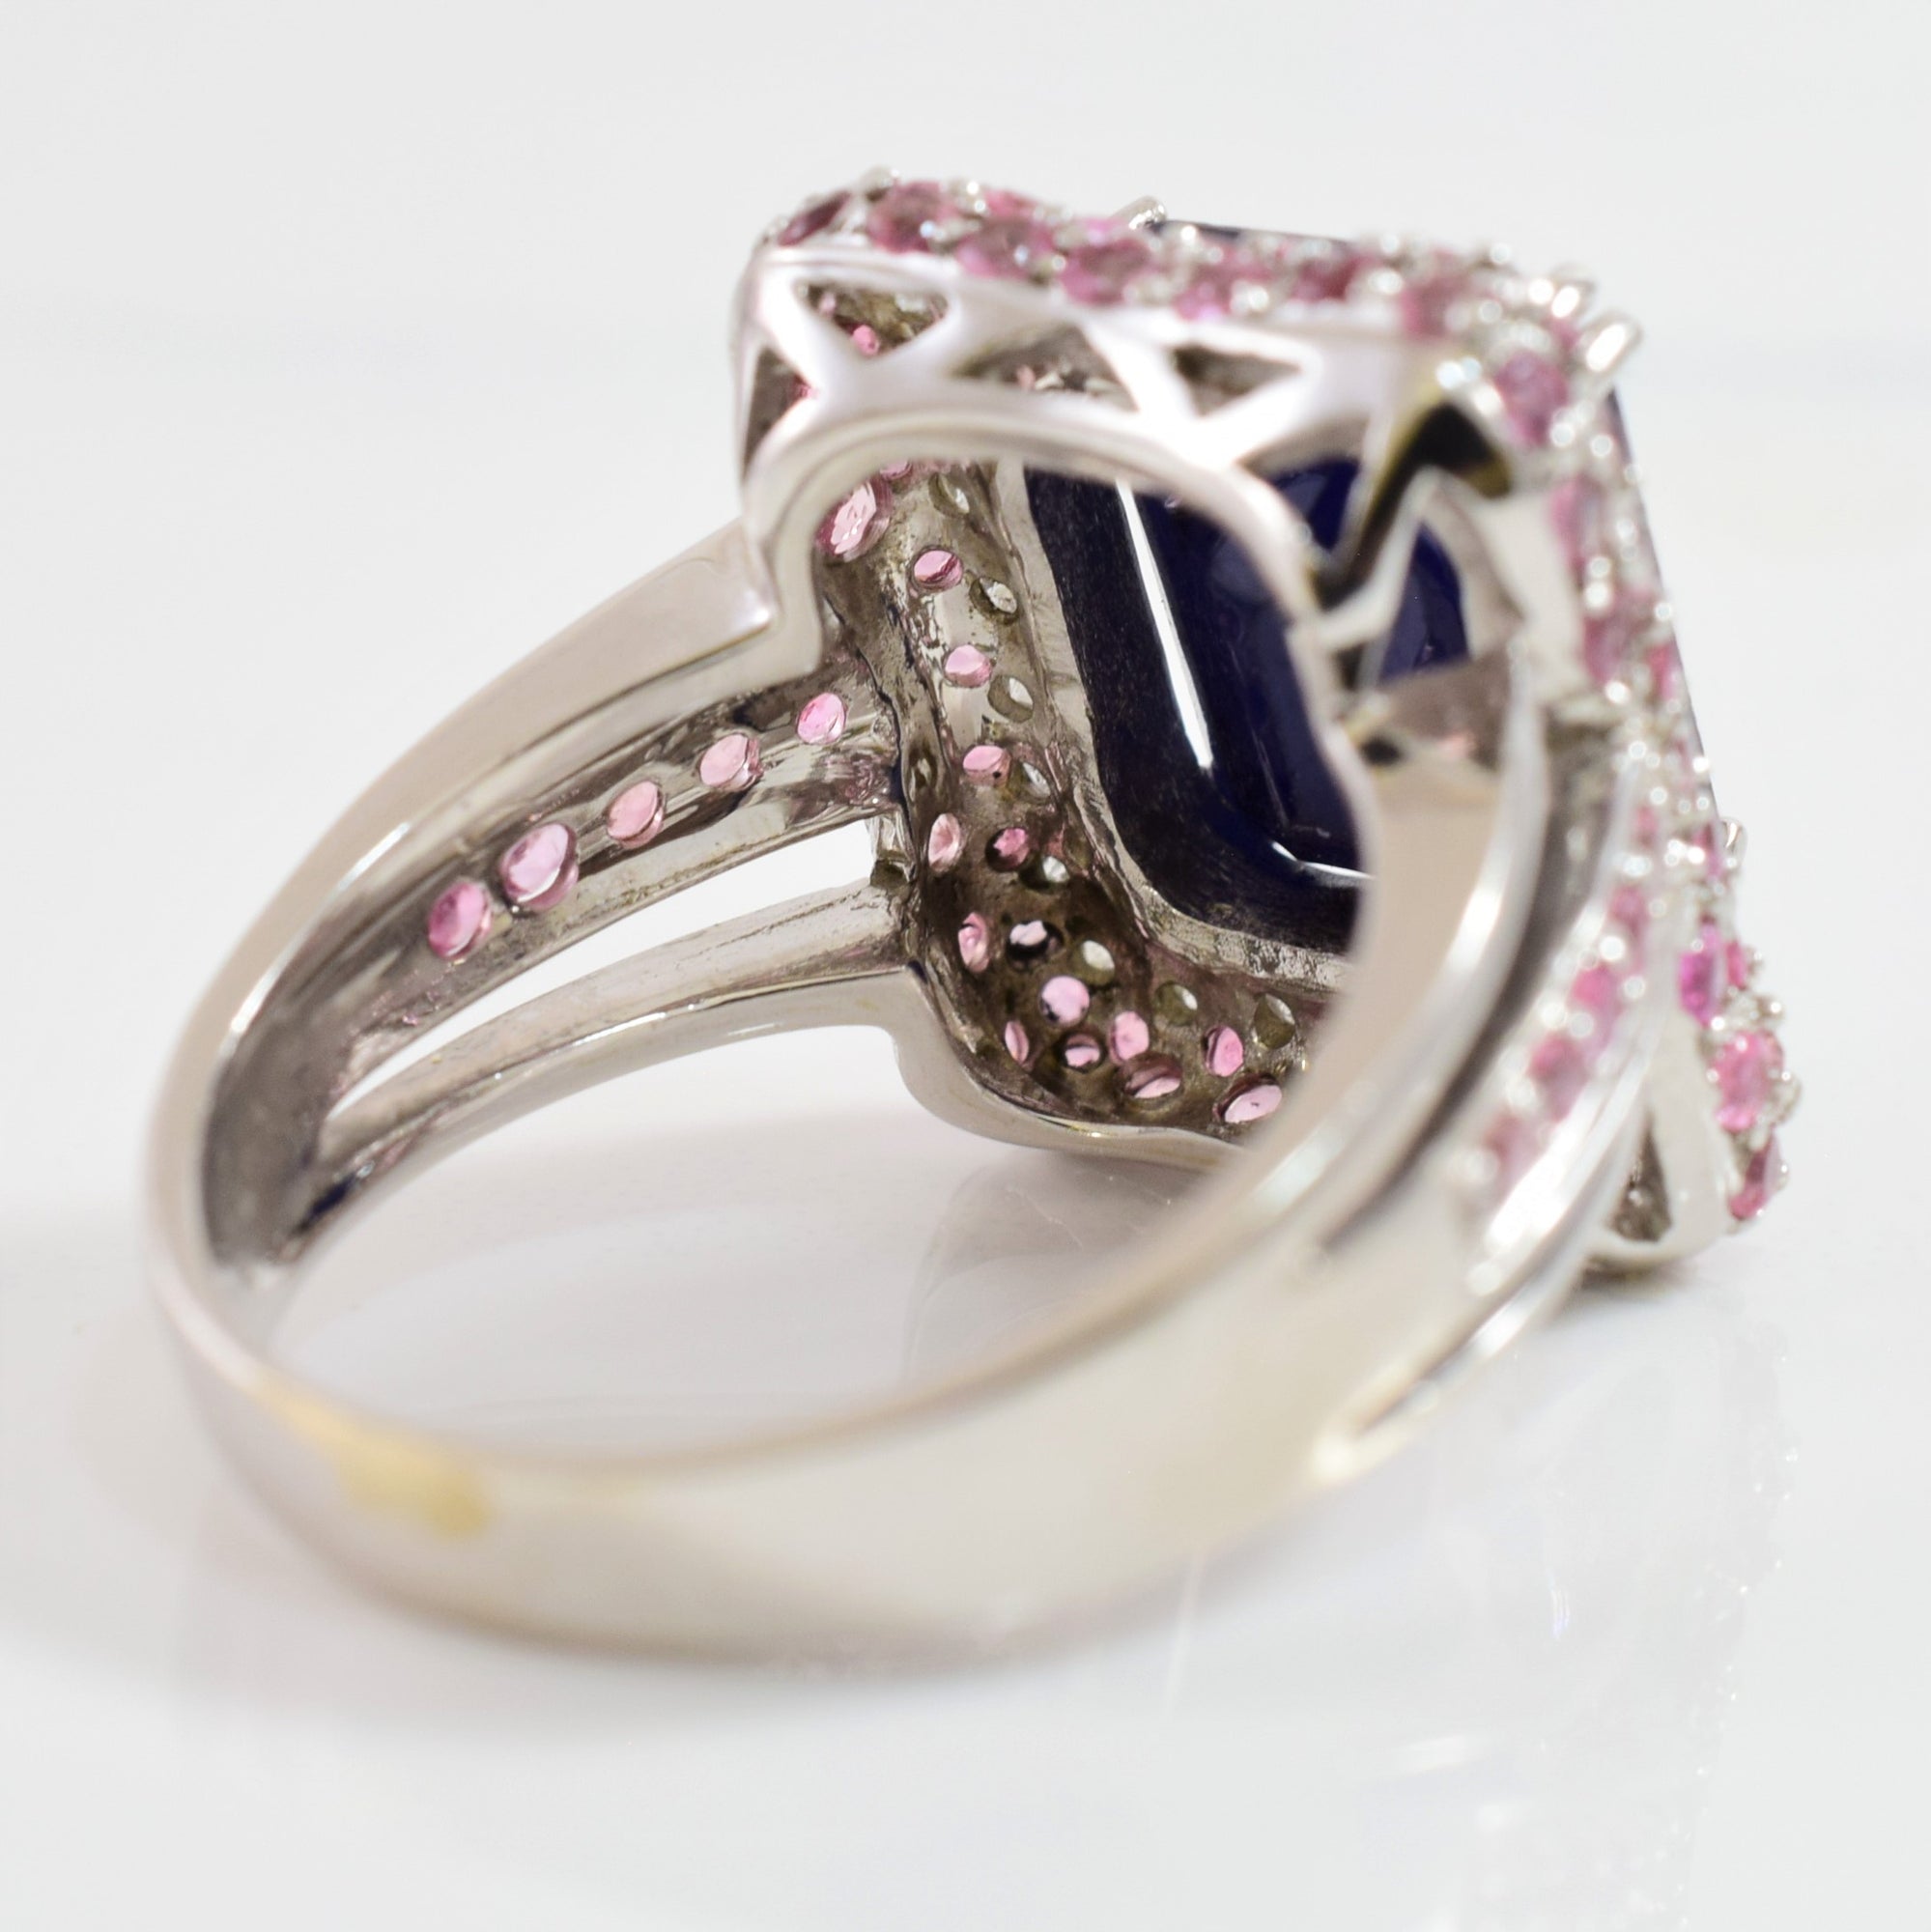 Prong Set Sapphire Ring with Diamond and Tourmaline Cluster | 0.50 ctw SZ 7.25 |